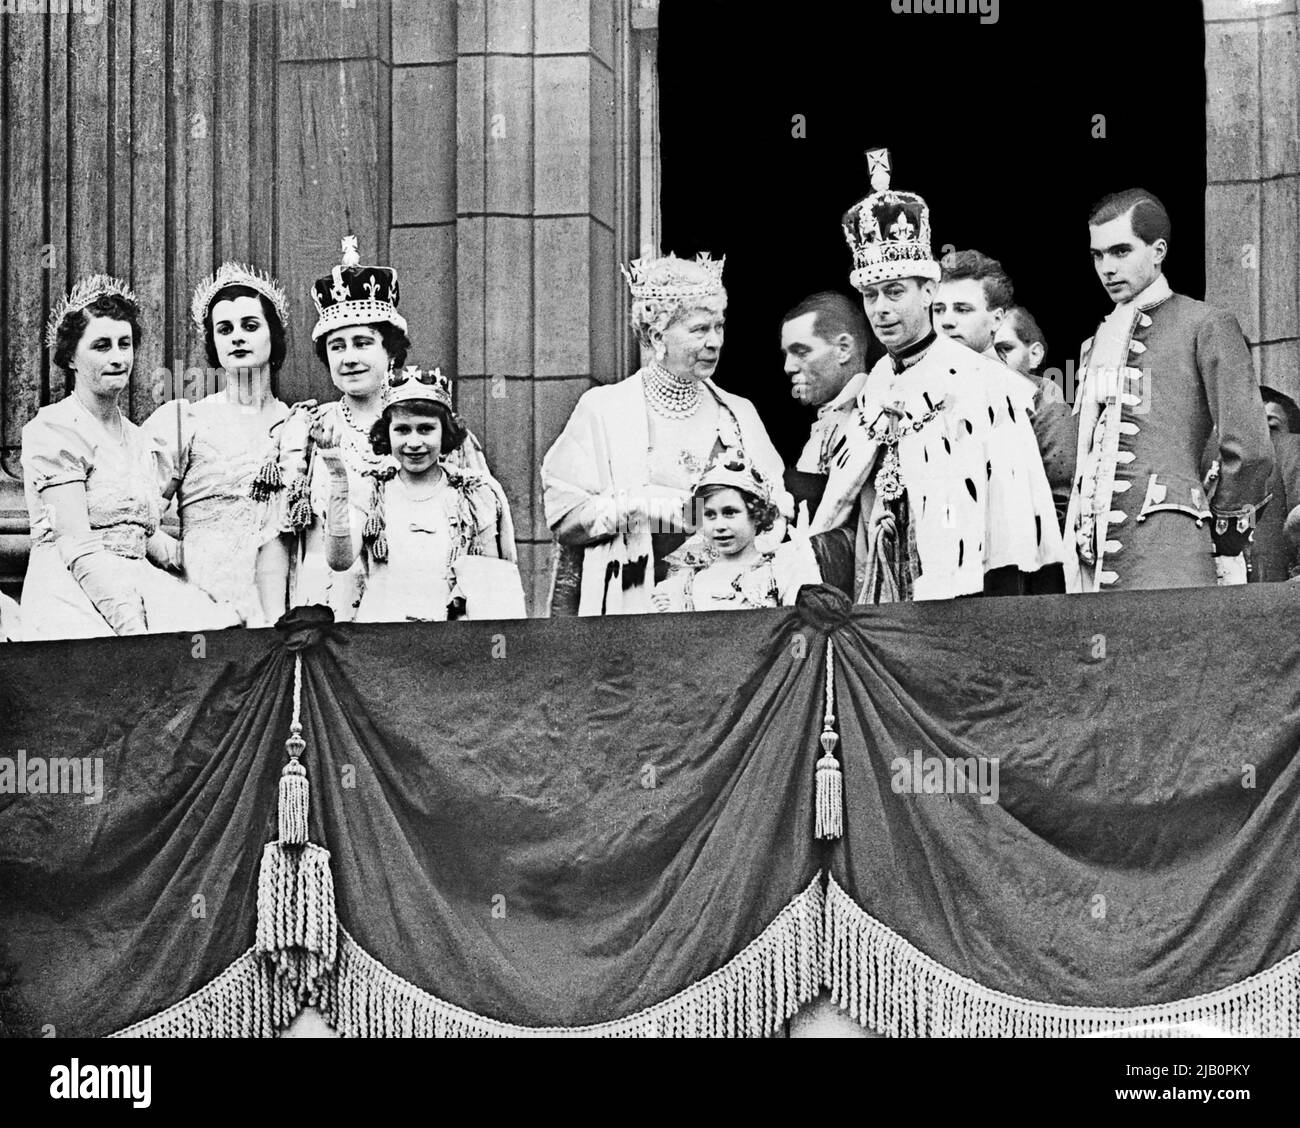 The Queen Elizabeth (2nd-L, future Queen Mother), her daughter Princess Elizabeth (4th-L, future Queen Elizabeth II), Queen Mary (C) , Princess Margaret (5th-L) and the King George VI (R), pose at the balcony of the Buckingham Palace on May 12, 1937 Stock Photo